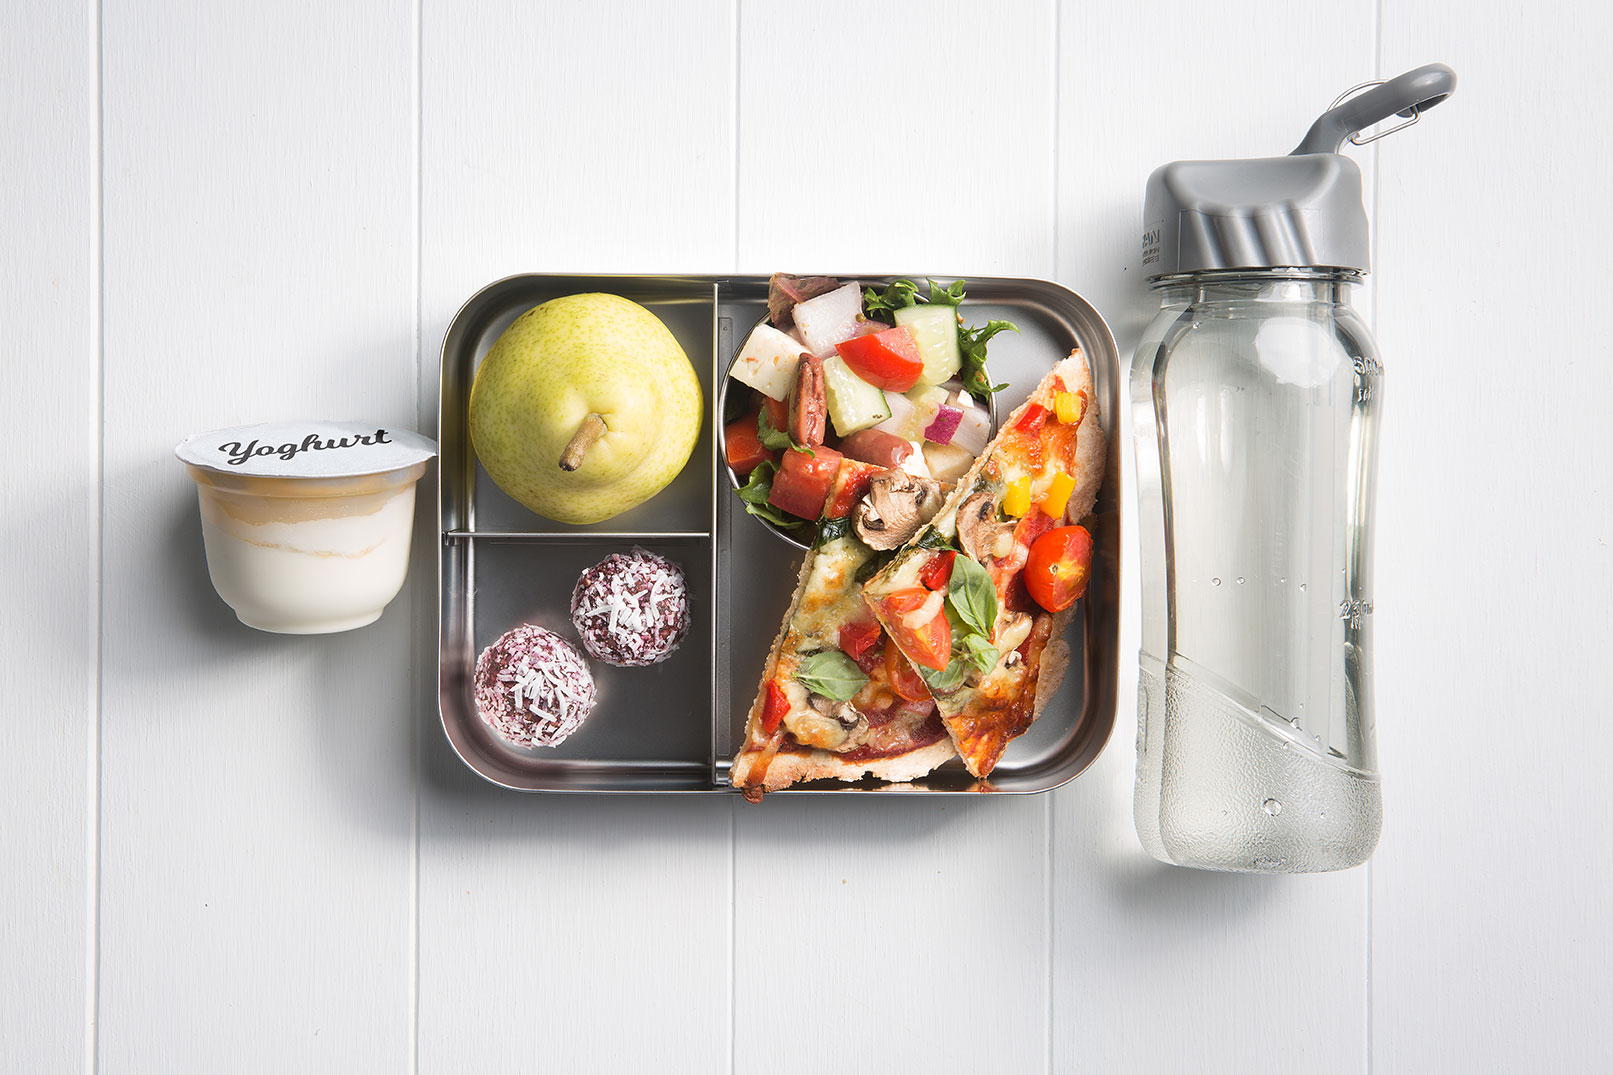 Image of a packed lunch box with greek salad, two easy pizza slices, green pear, beetroot and spinach bliss balls, yoghurt tub and a bottle of water on the side